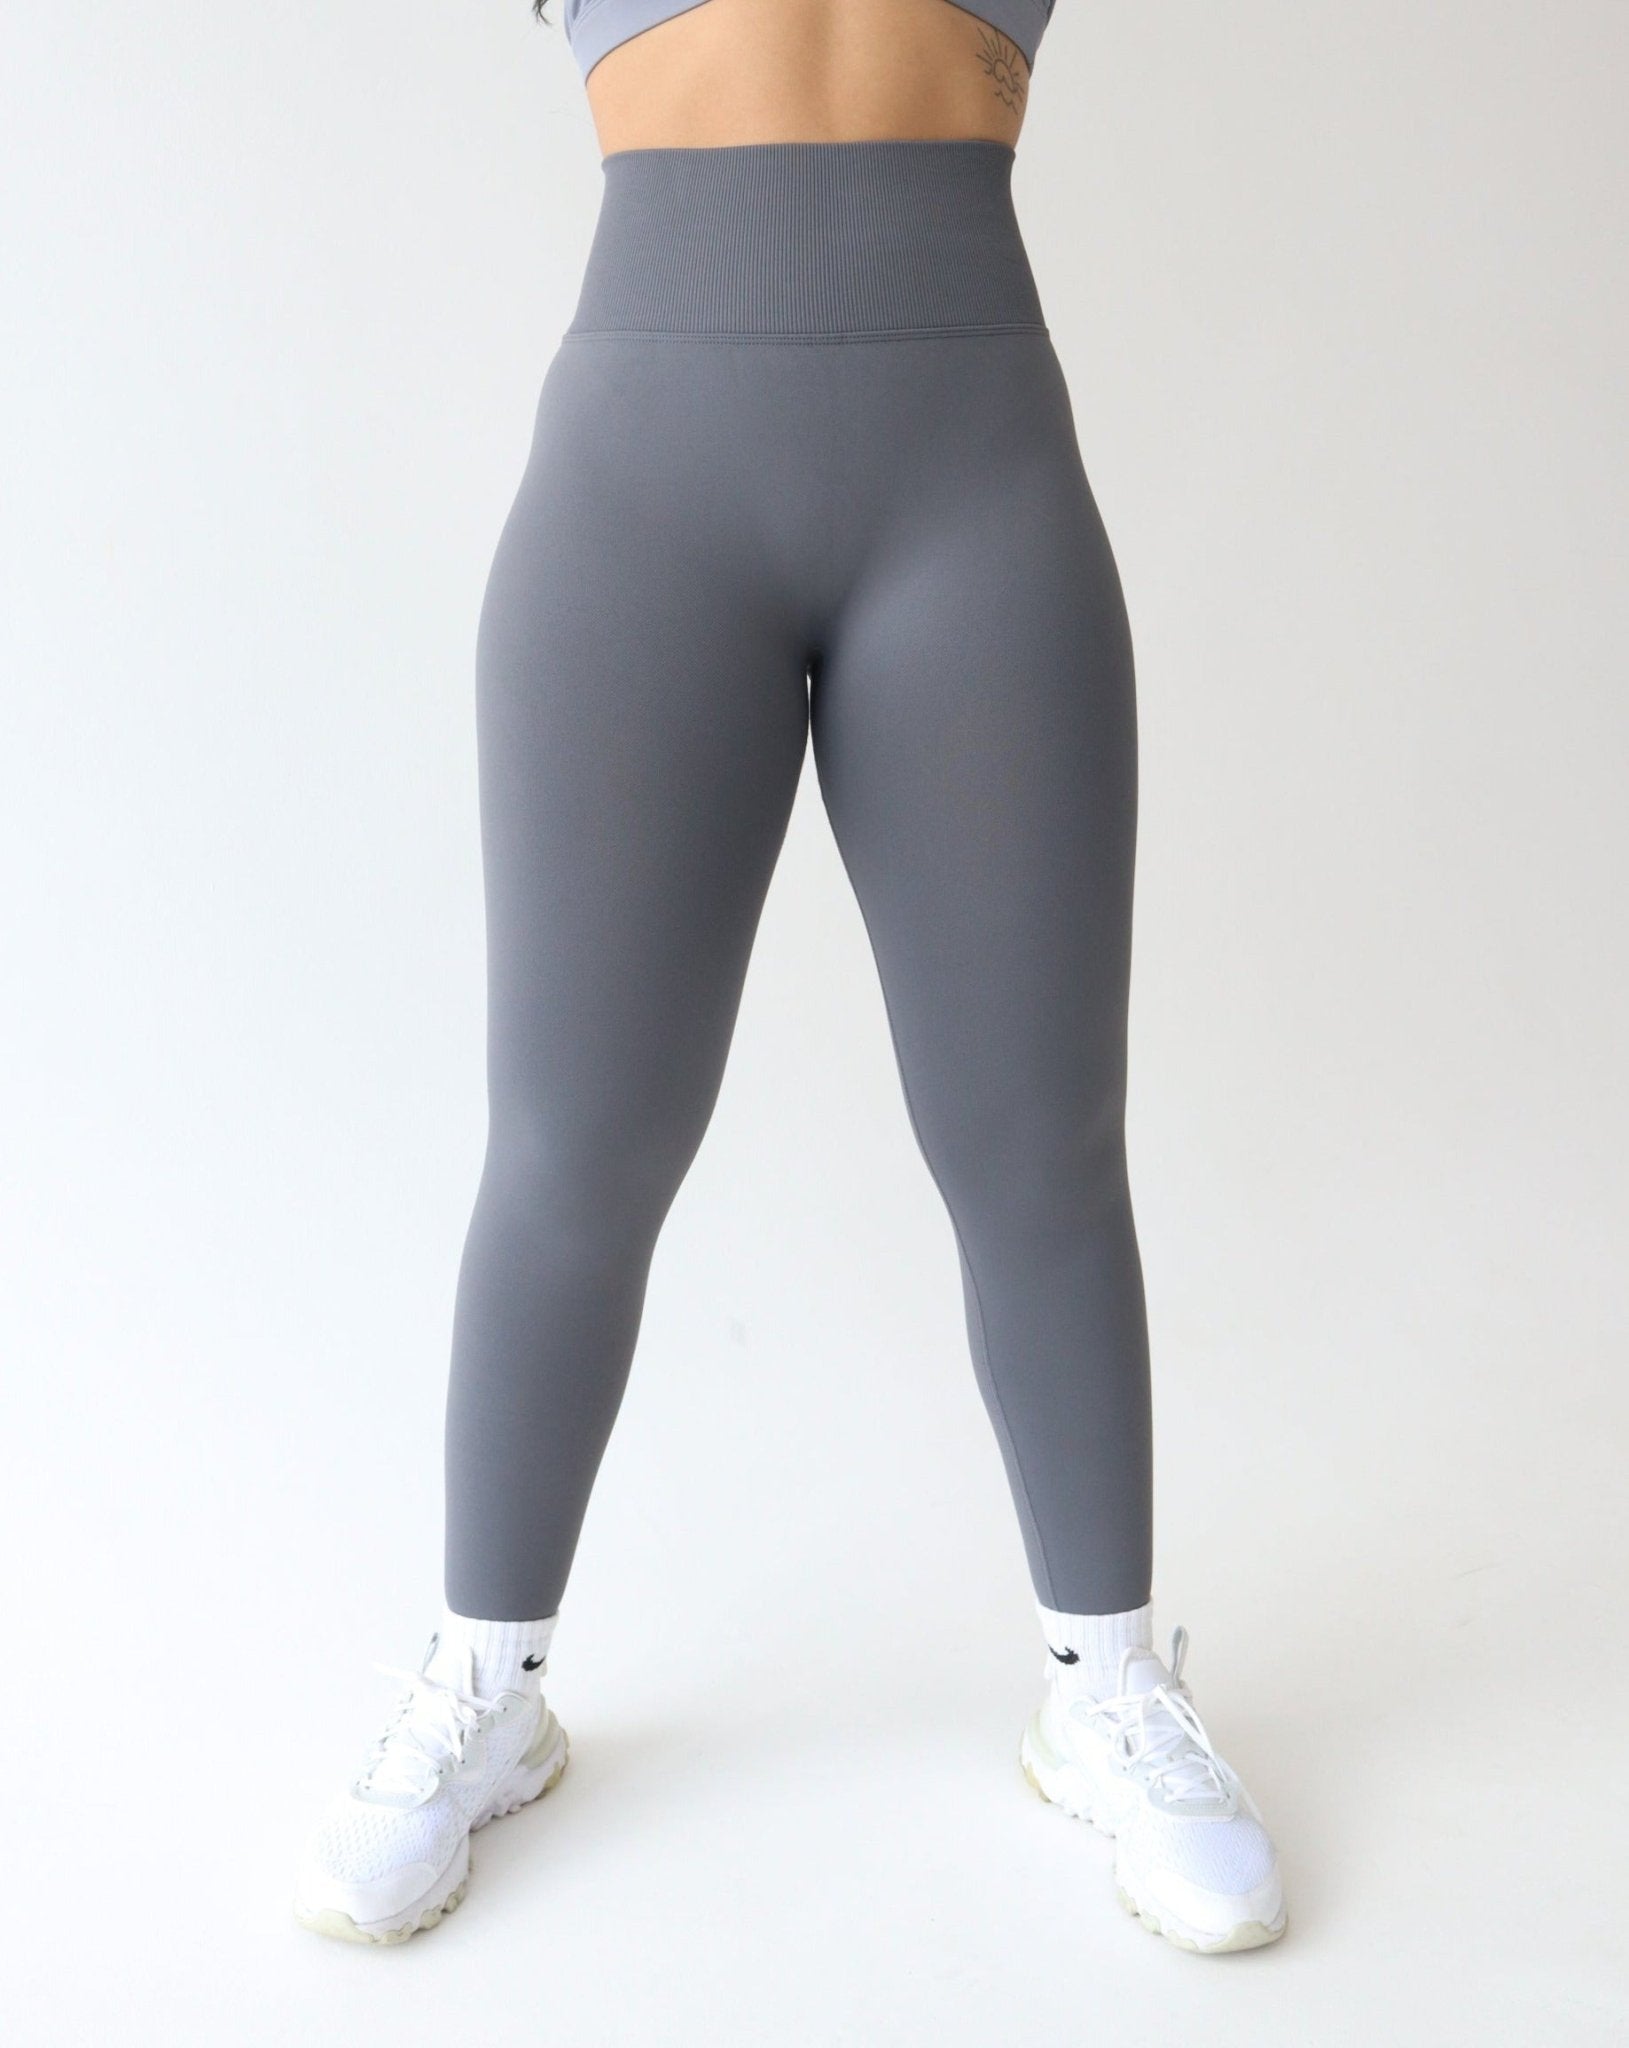 NVGTN GREY High Waisted Seamless Contouring Leggings Size Small 